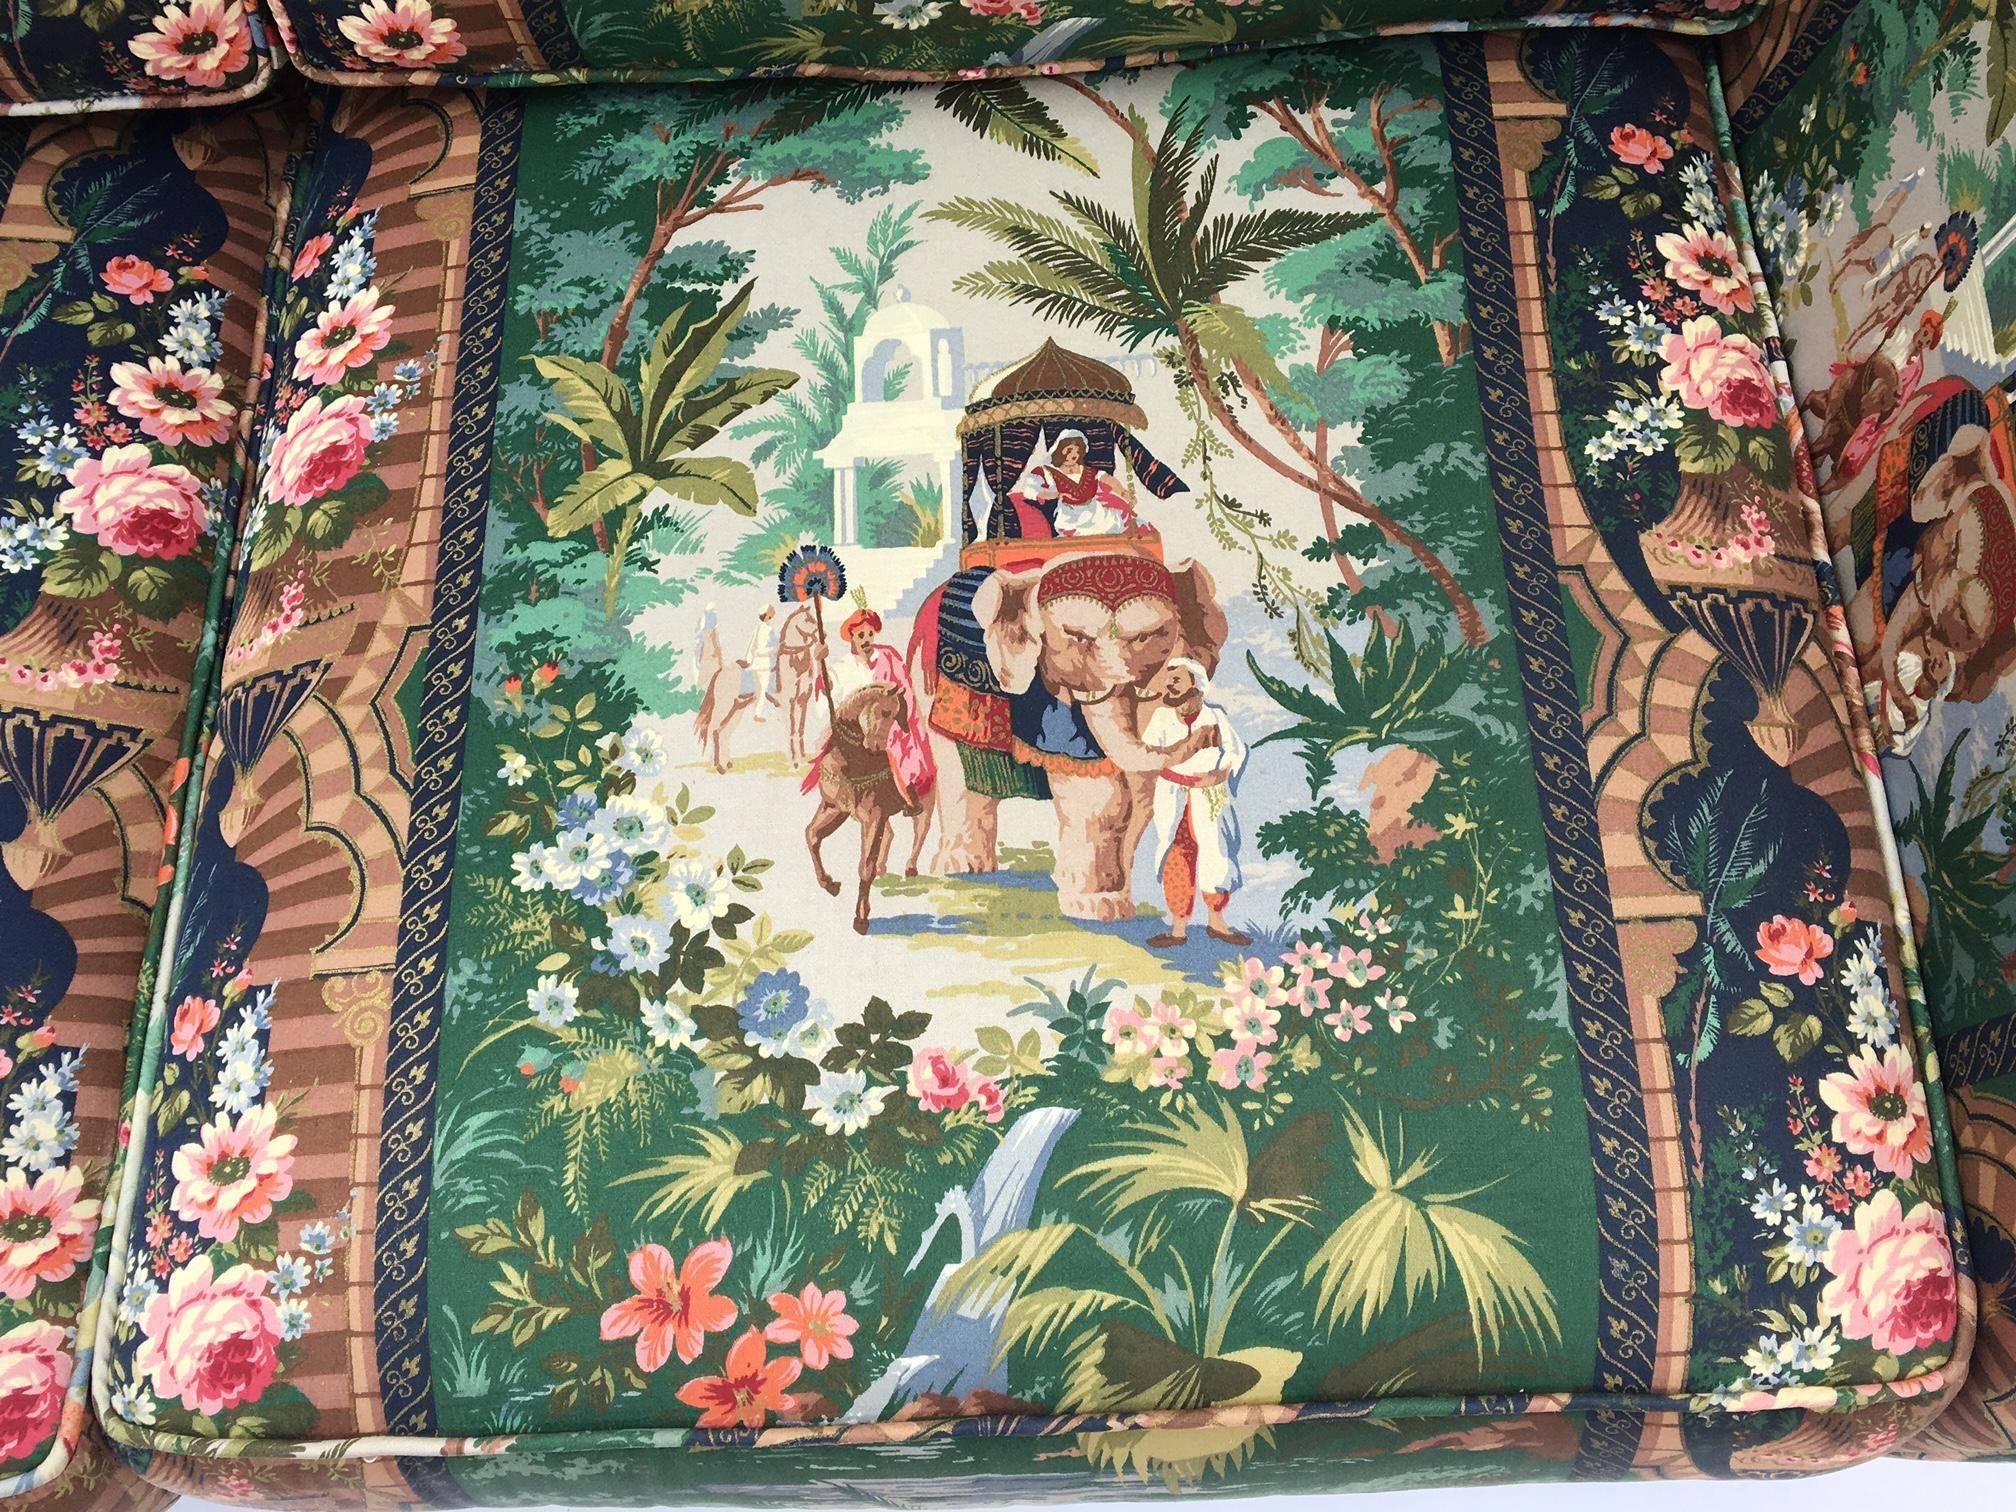 One of a kind sleeper sofa upholstered in a Moroccan themed print featuring elephants, palms, and flowers! Excellent vintage condition with very minimal signs of wear.

Dimensions: 80.5